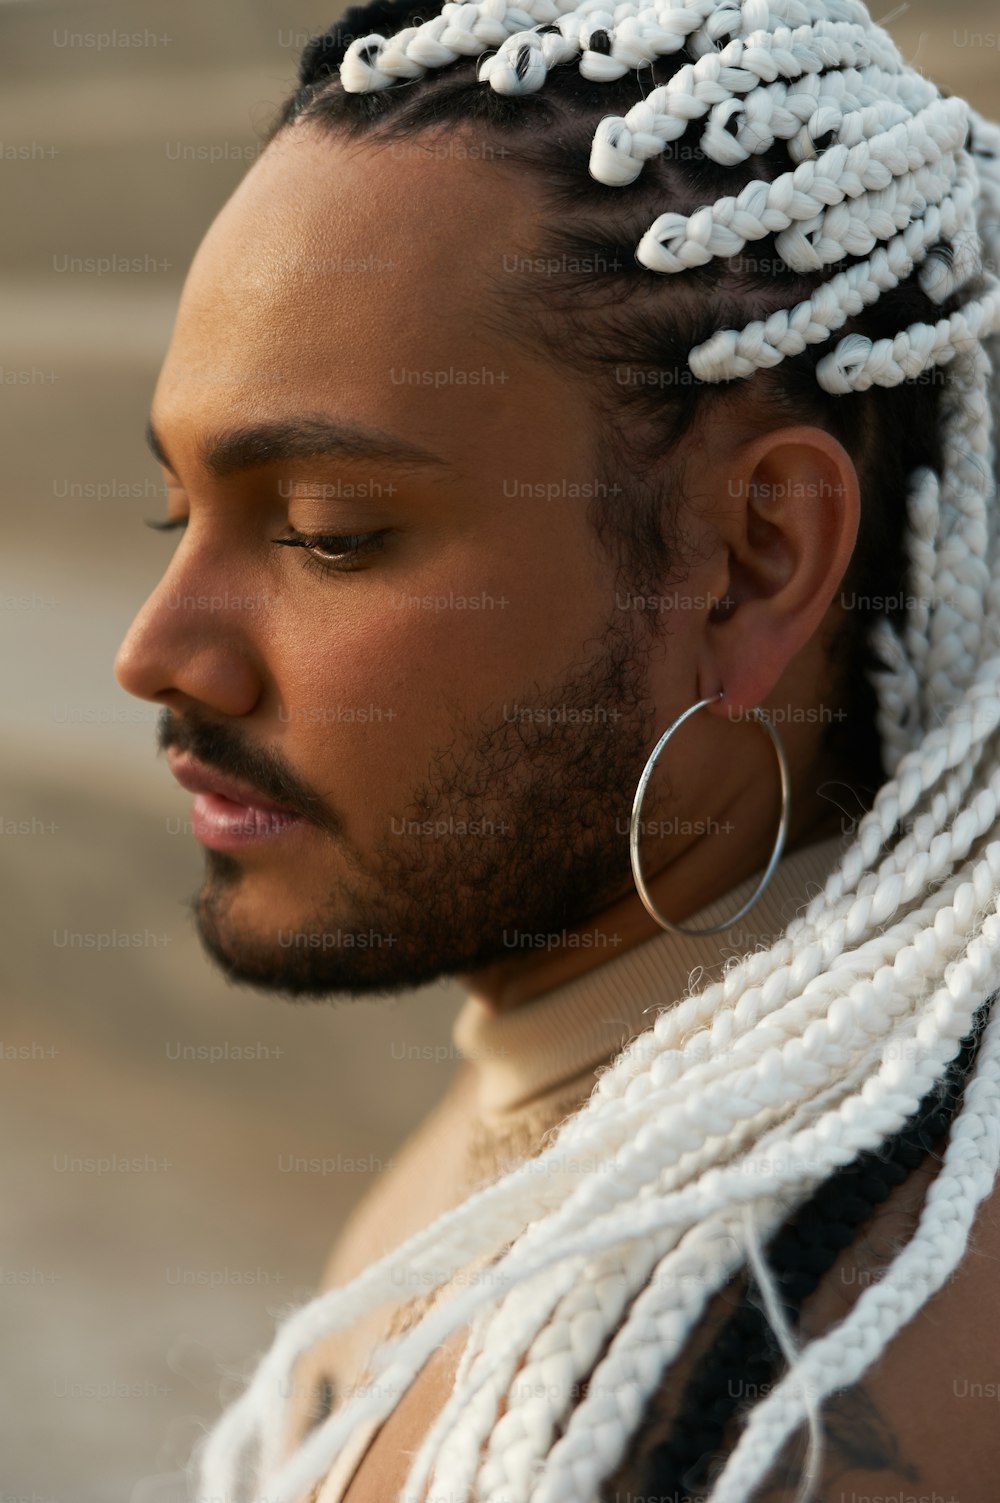 a man with dreadlocks and a hoop earring